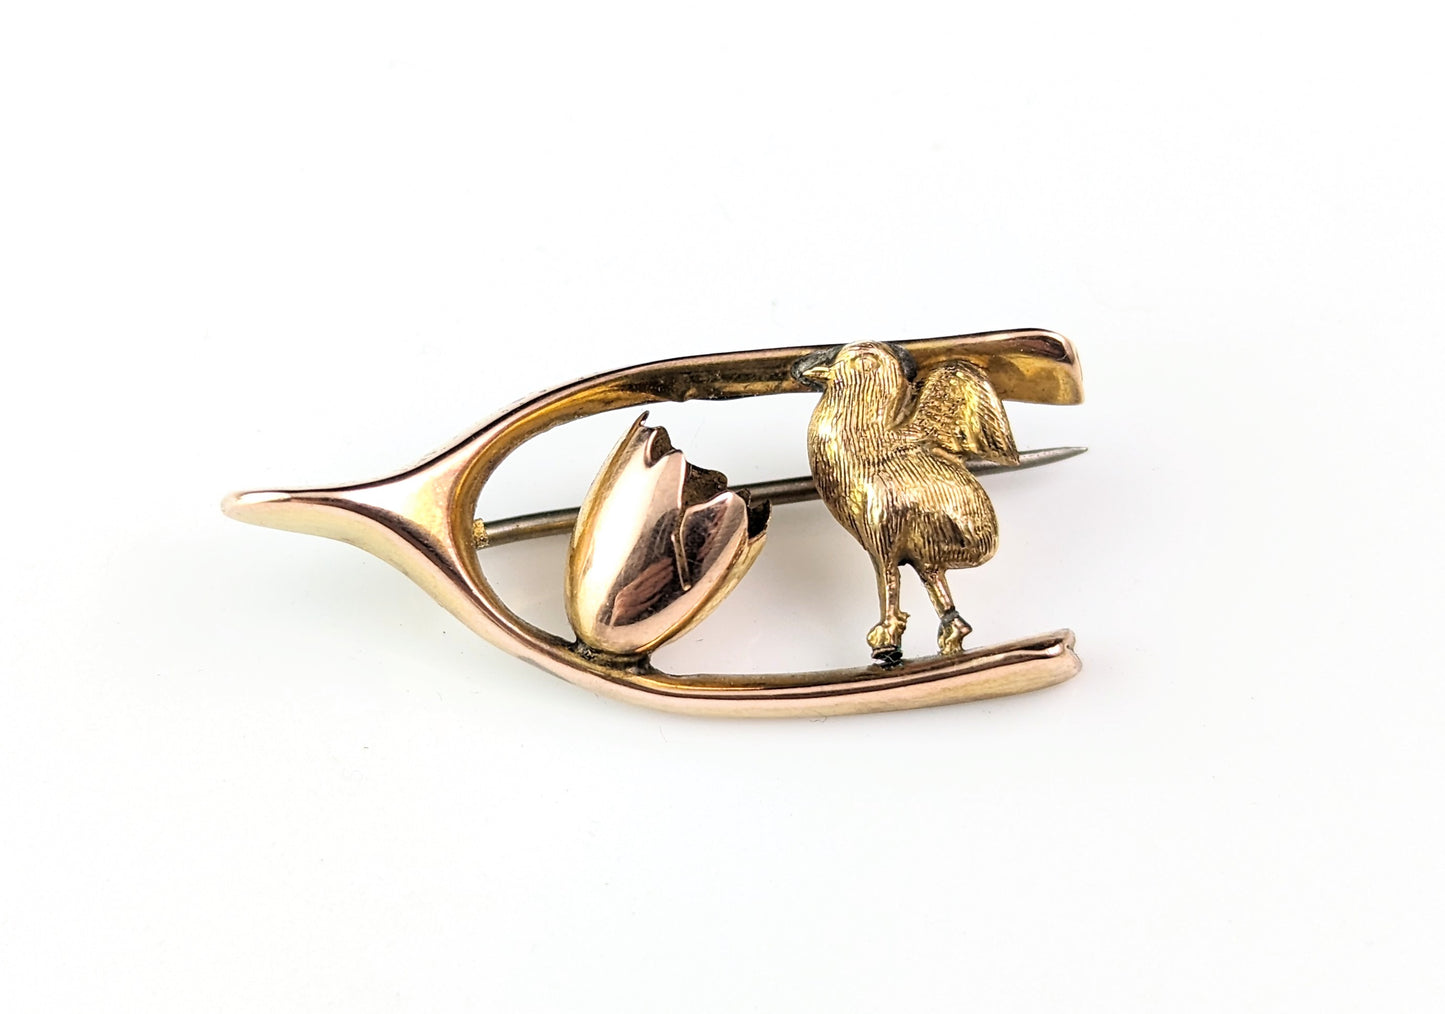 Antique Victorian Chick and Egg brooch, 9ct gold, Lucky Wishbone